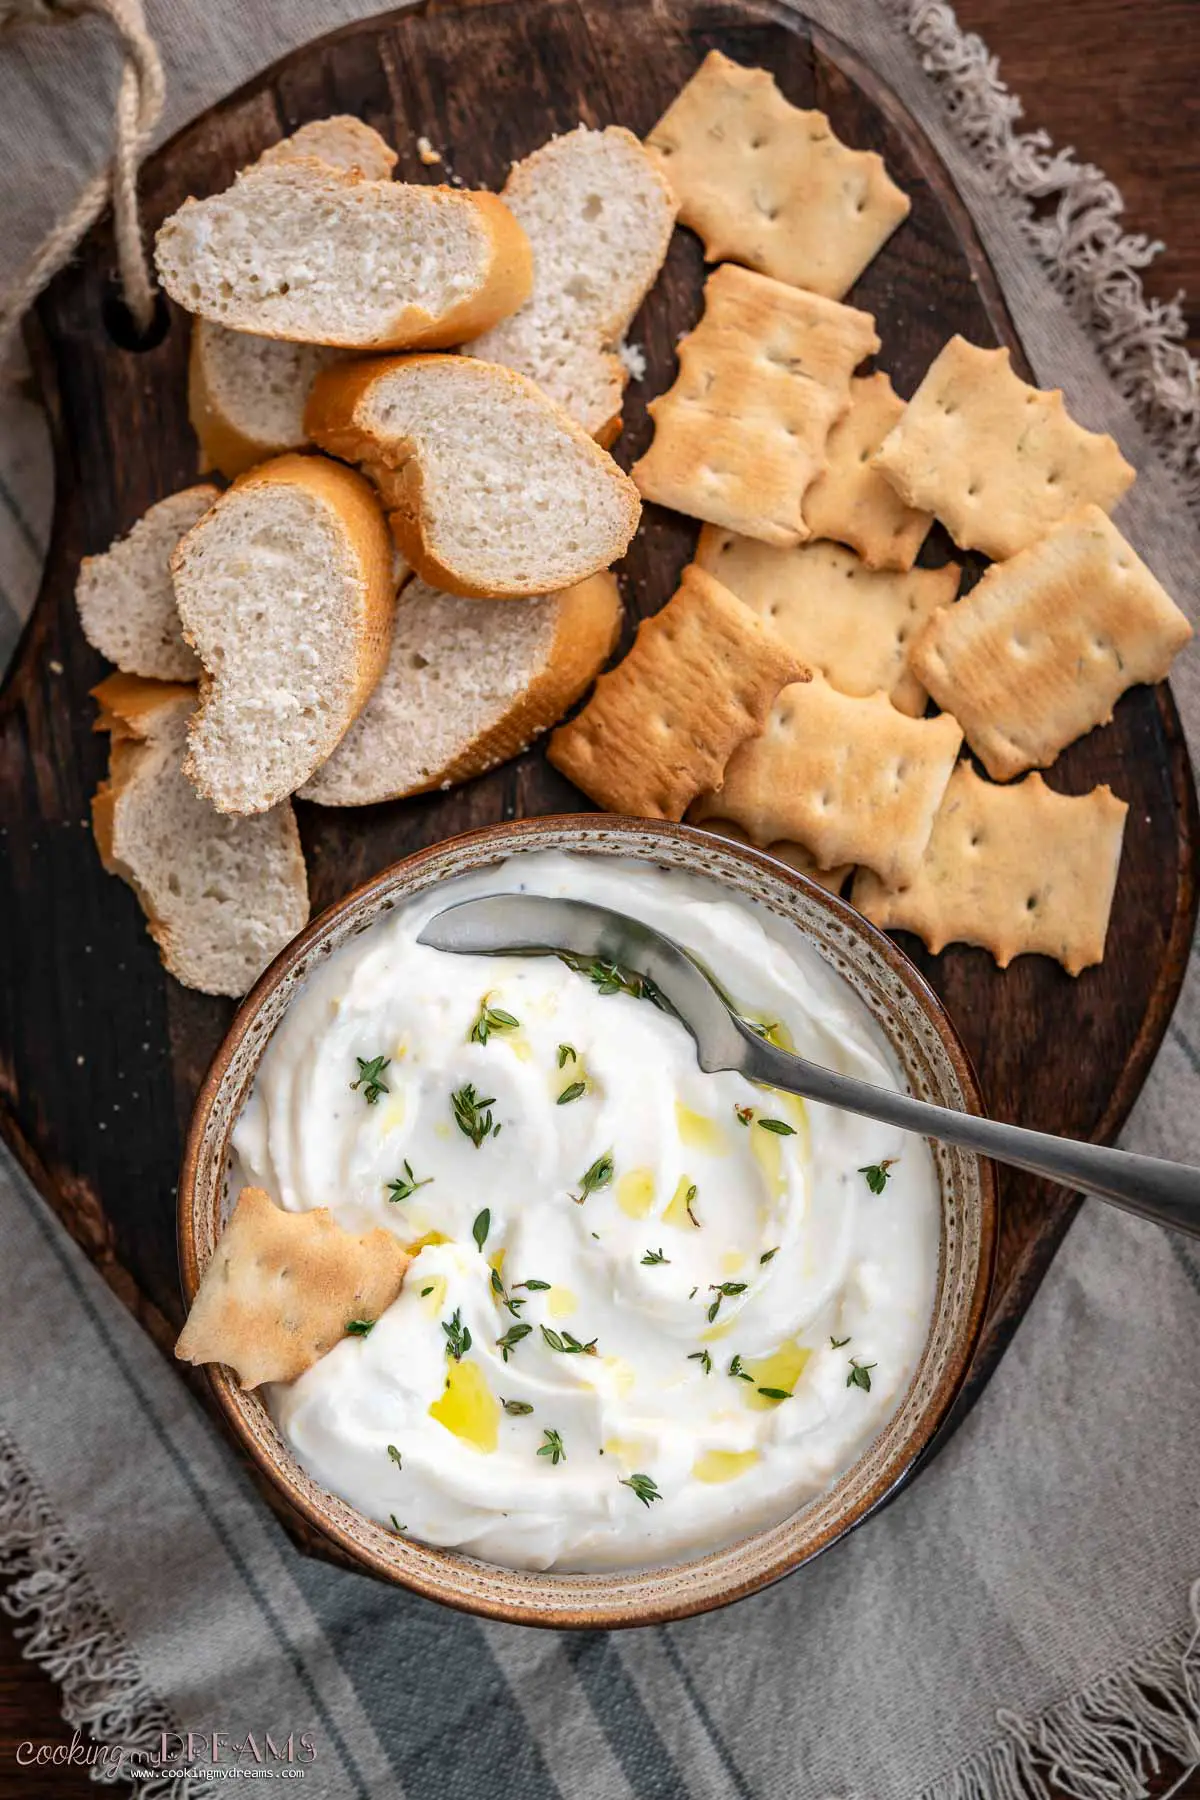 whipped ricotta dip in a bowl next to bread and crackers